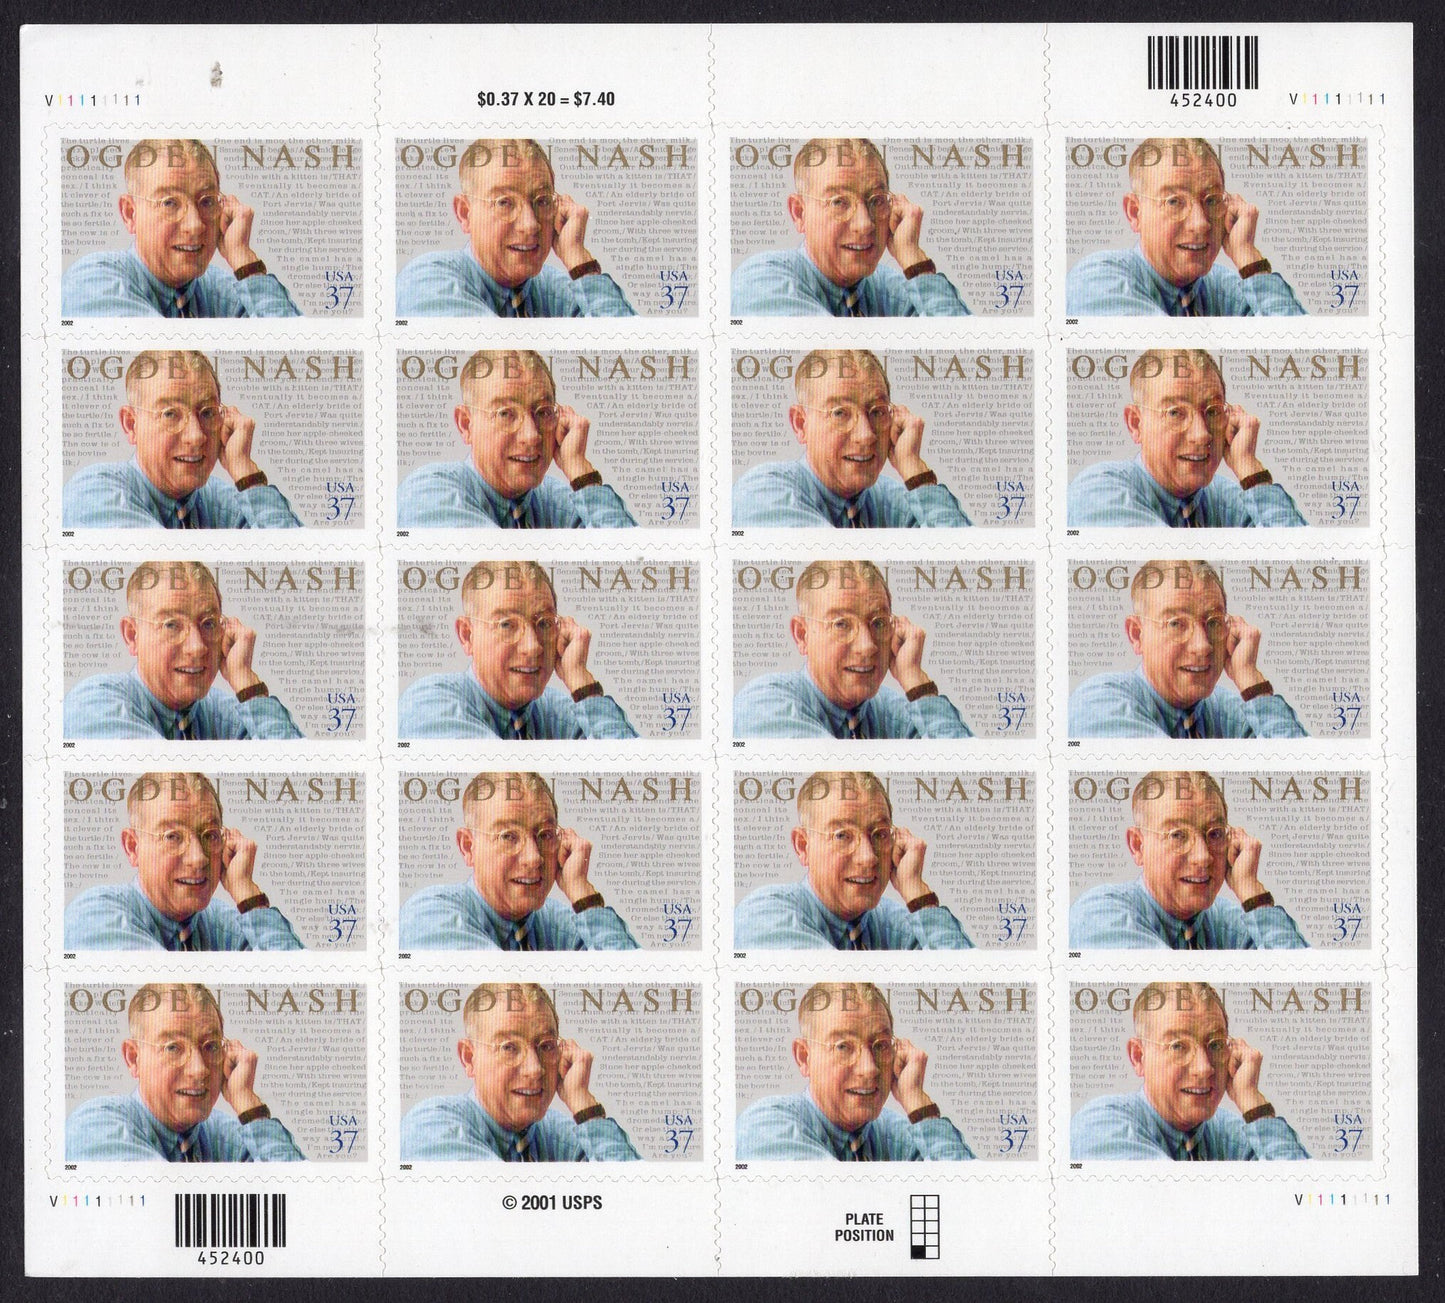 OGDEN NASH HUMORIST 37c Sheet of 20 Stamps - Mint, Bright and Post Office Fresh - Issued in 2002 - s3659 -